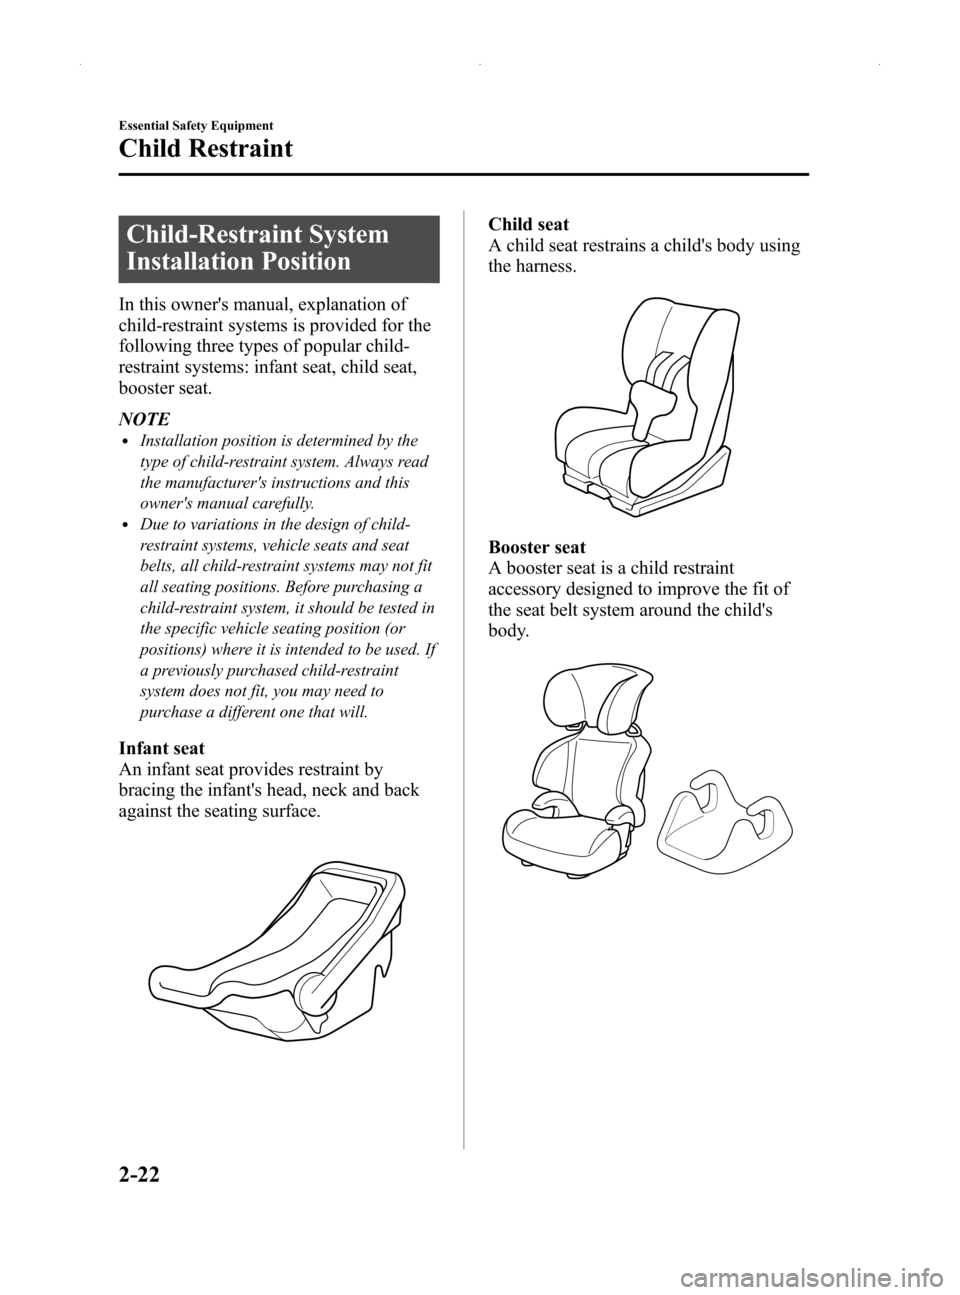 MAZDA MODEL MX-5 2014   (in English) Owners Guide Black plate (34,1)
Child-Restraint System
Installation Position
In this owners manual, explanation of
child-restraint systems is provided for the
following three types of popular child-
restraint sys